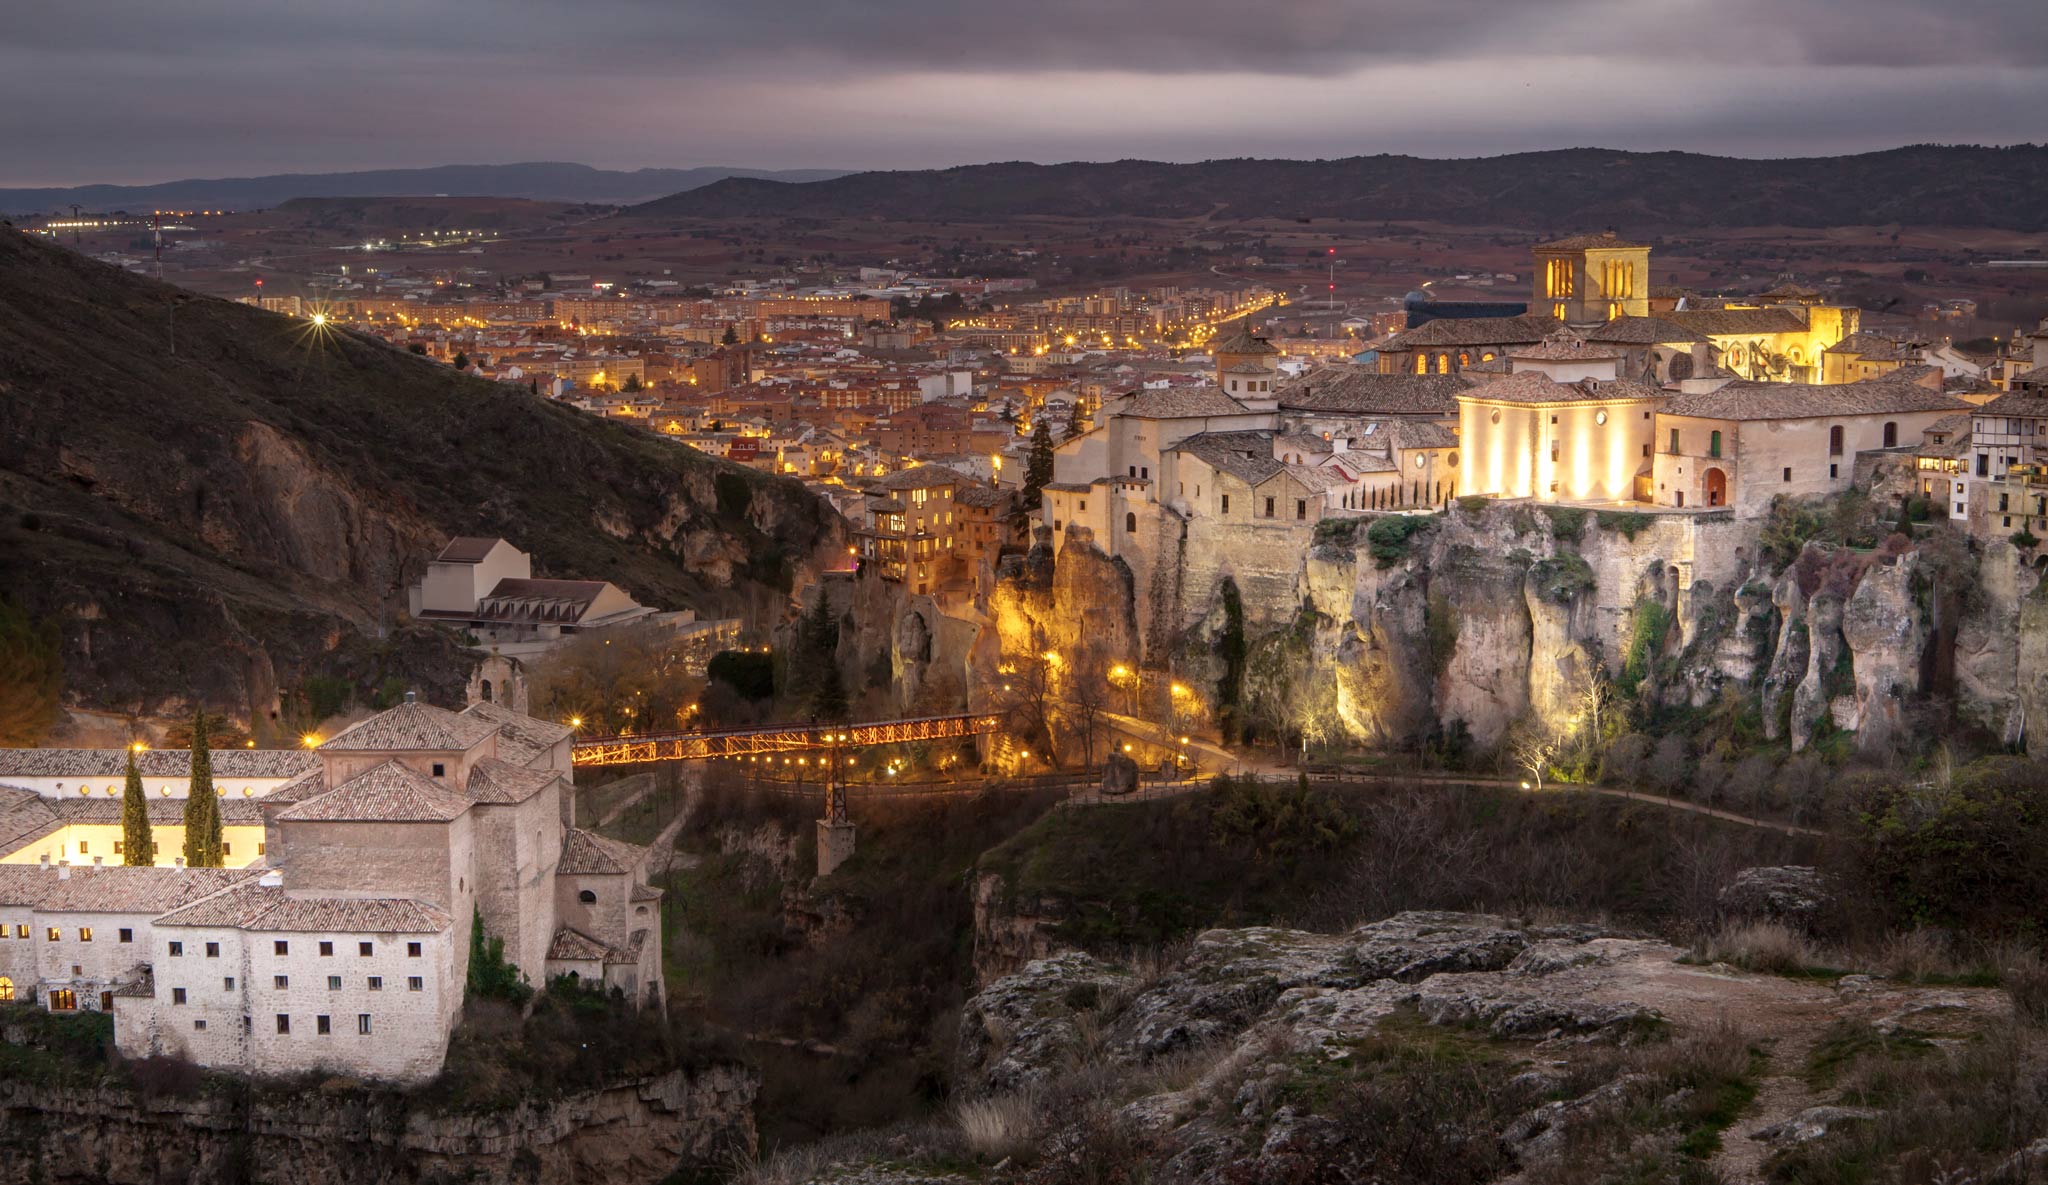 View of Cuenca at dusk, one of the most beautiful cities in Spain